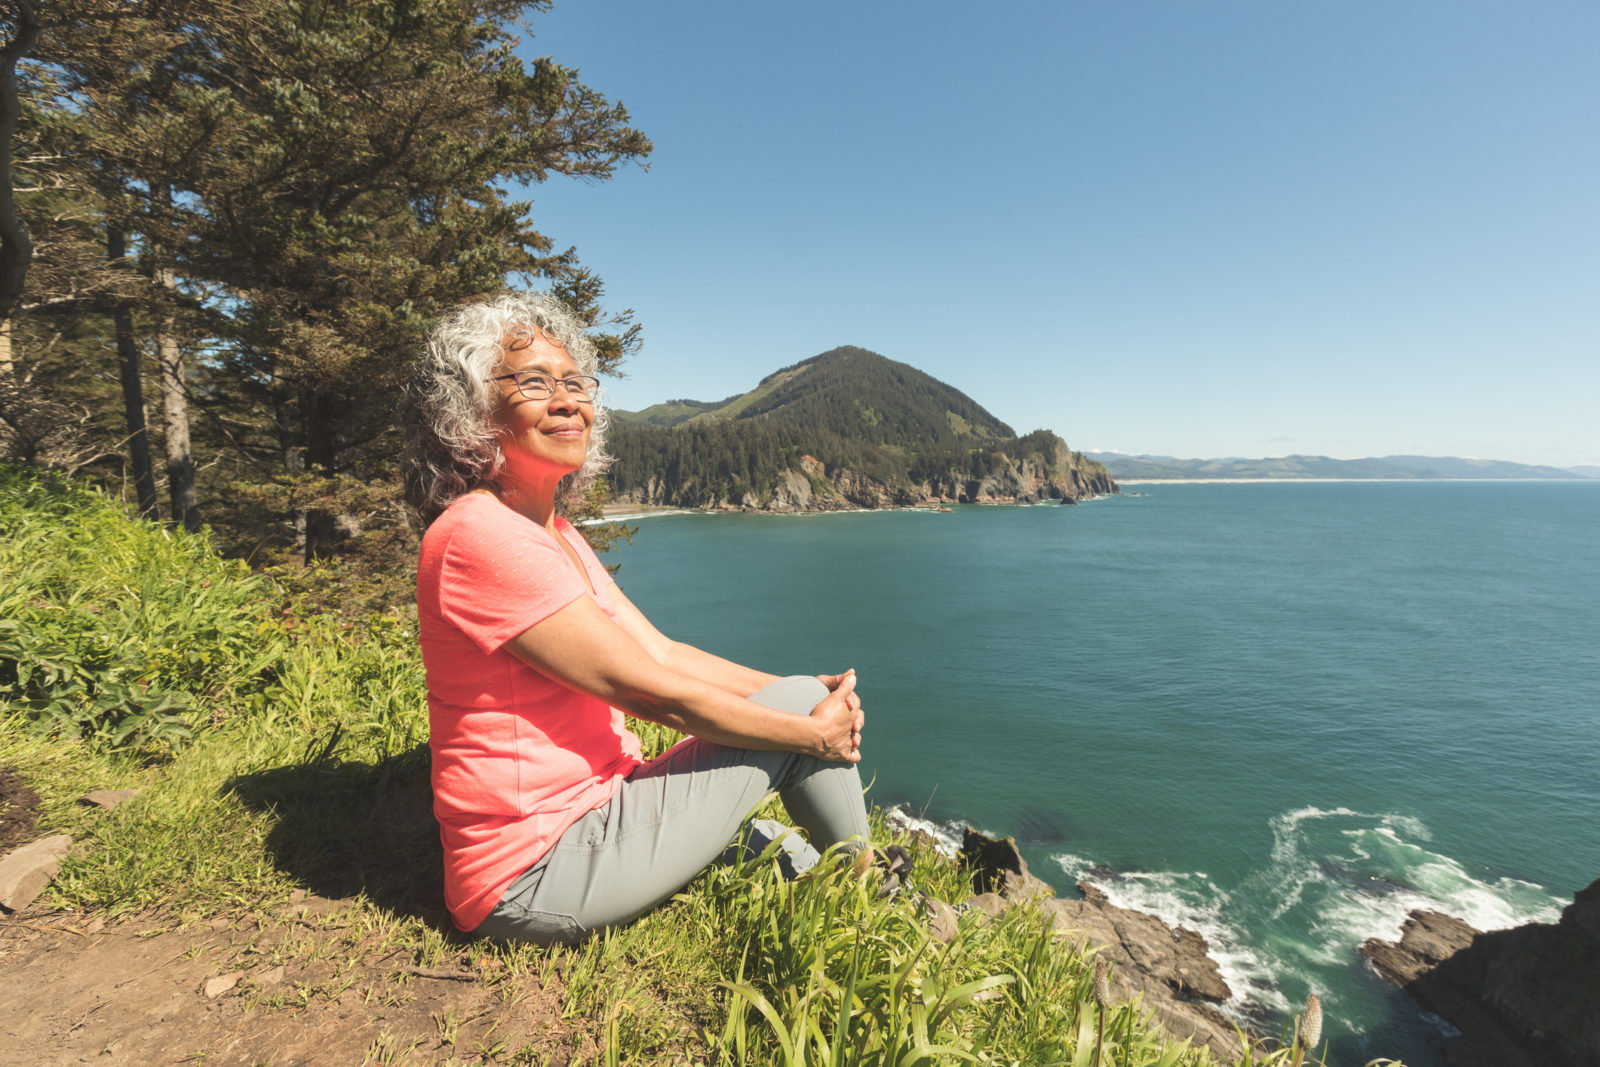 A cute senior woman relaxes on the rocks by a cliff overlooking the ocean. She has been hiking in the forest above the cliffs. A forested mountain range is in the distance and there are rocks jutting out from the ocean below.